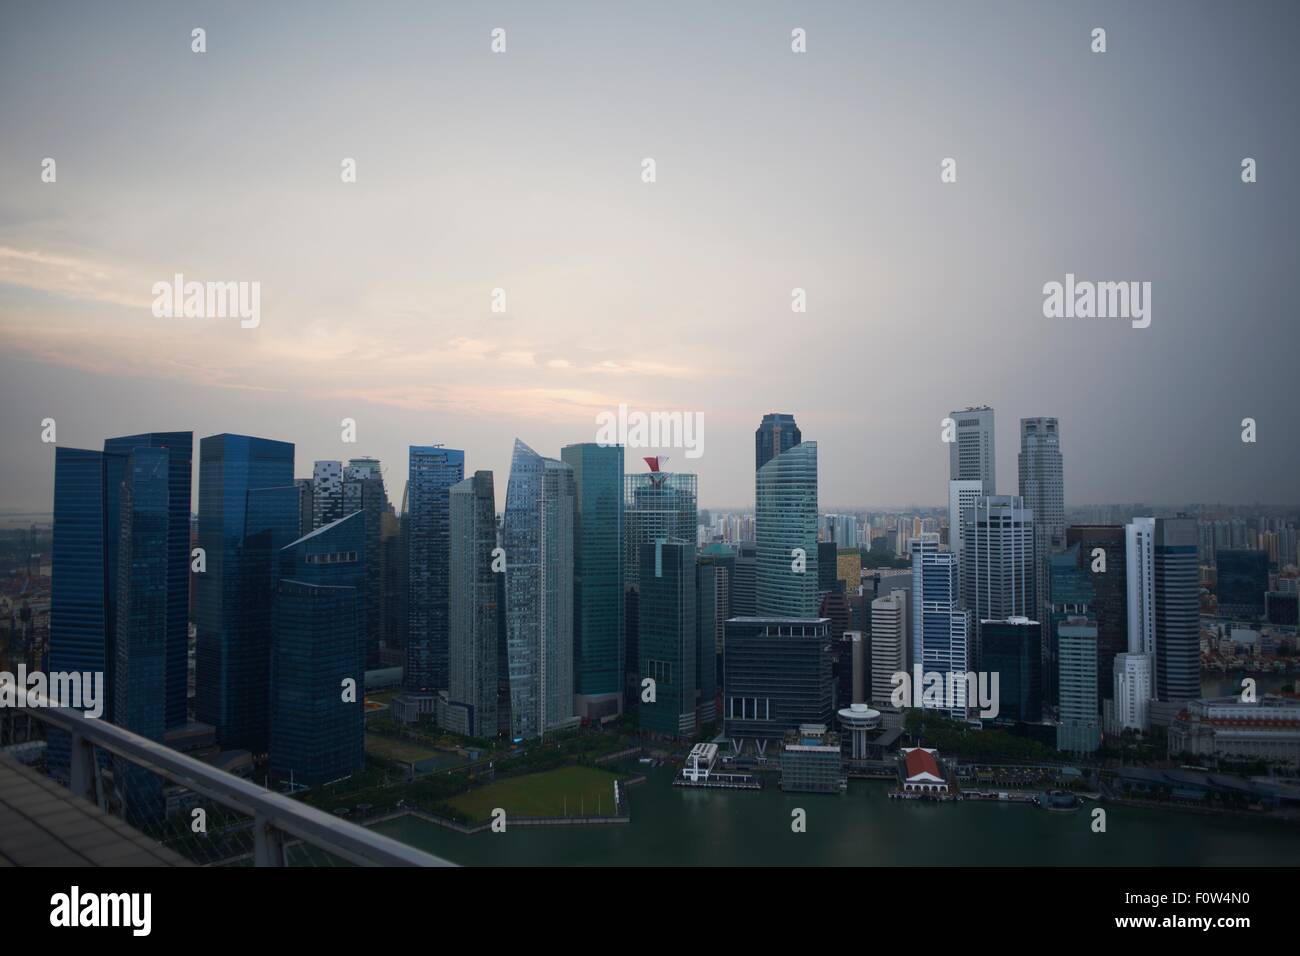 Cityscape and skyscrapers at dawn, Singapore Stock Photo